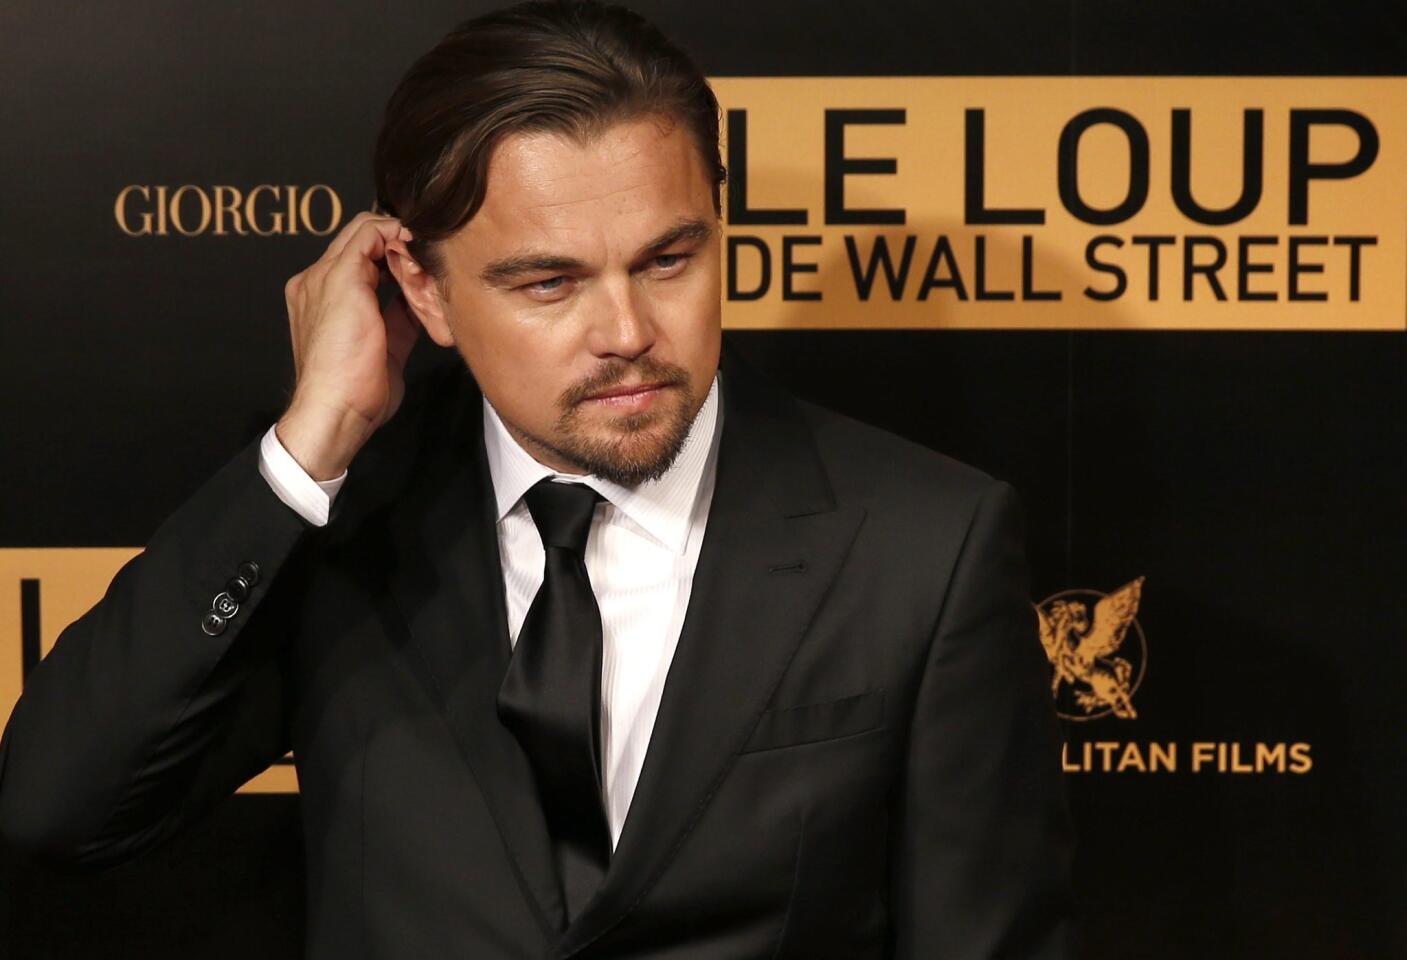 Leonardo DiCaprio, lead actor in 'The Wolf of Wall Street'